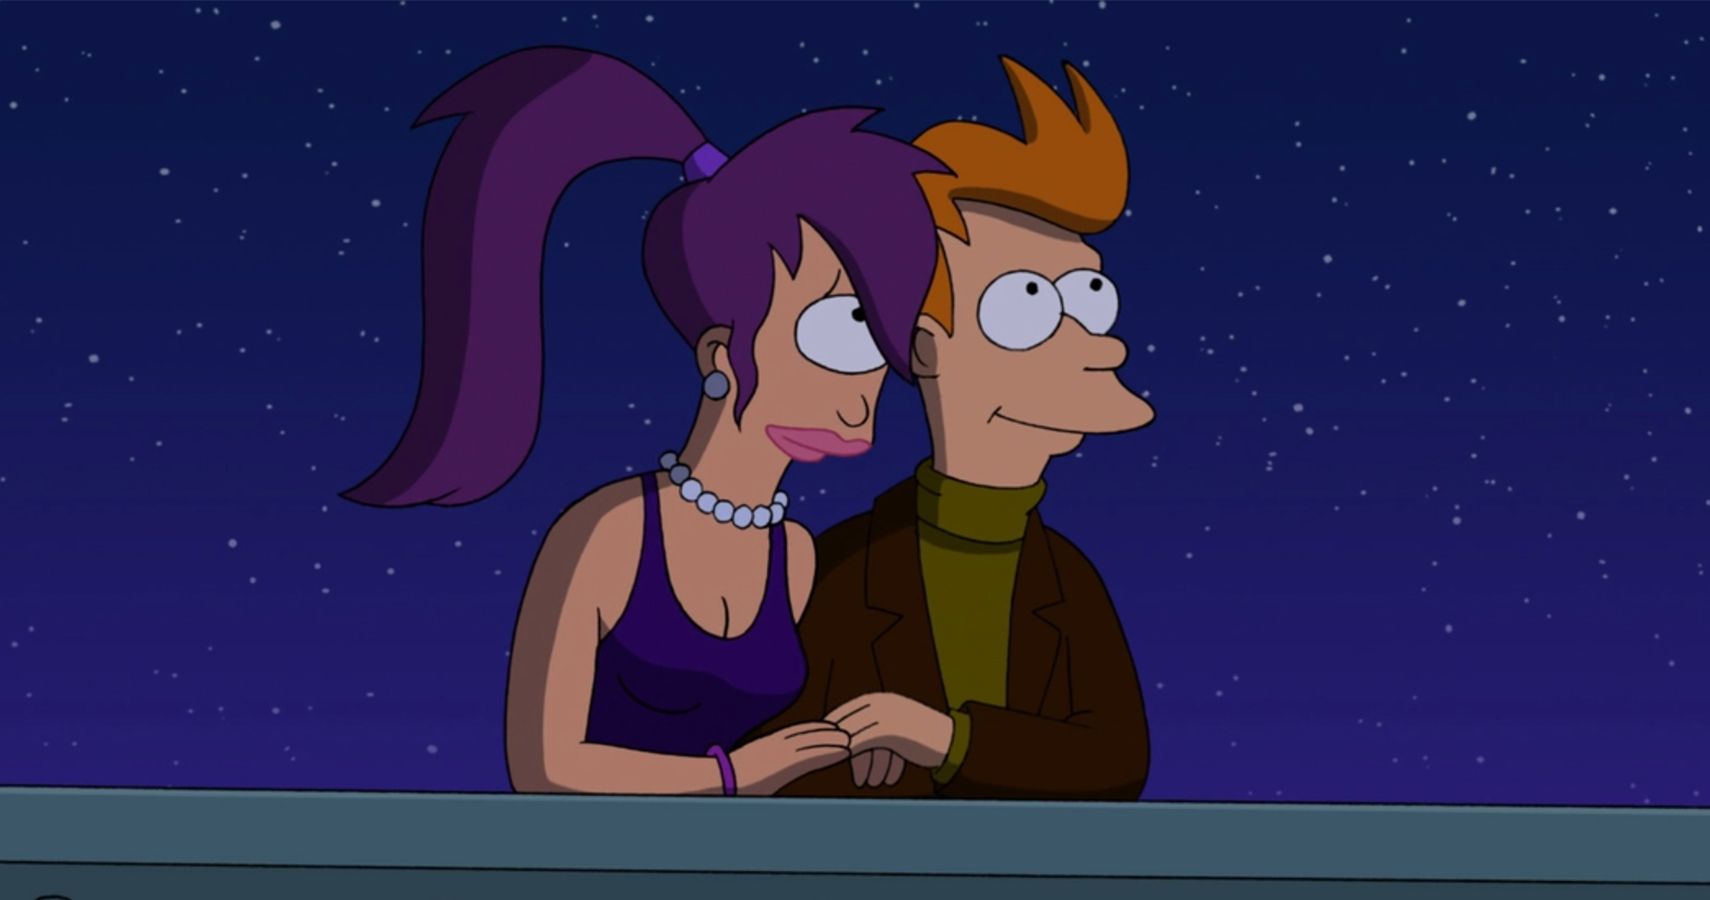 Philip J Fry and Turanga Leela on Futurama have one of the most unlikely re...